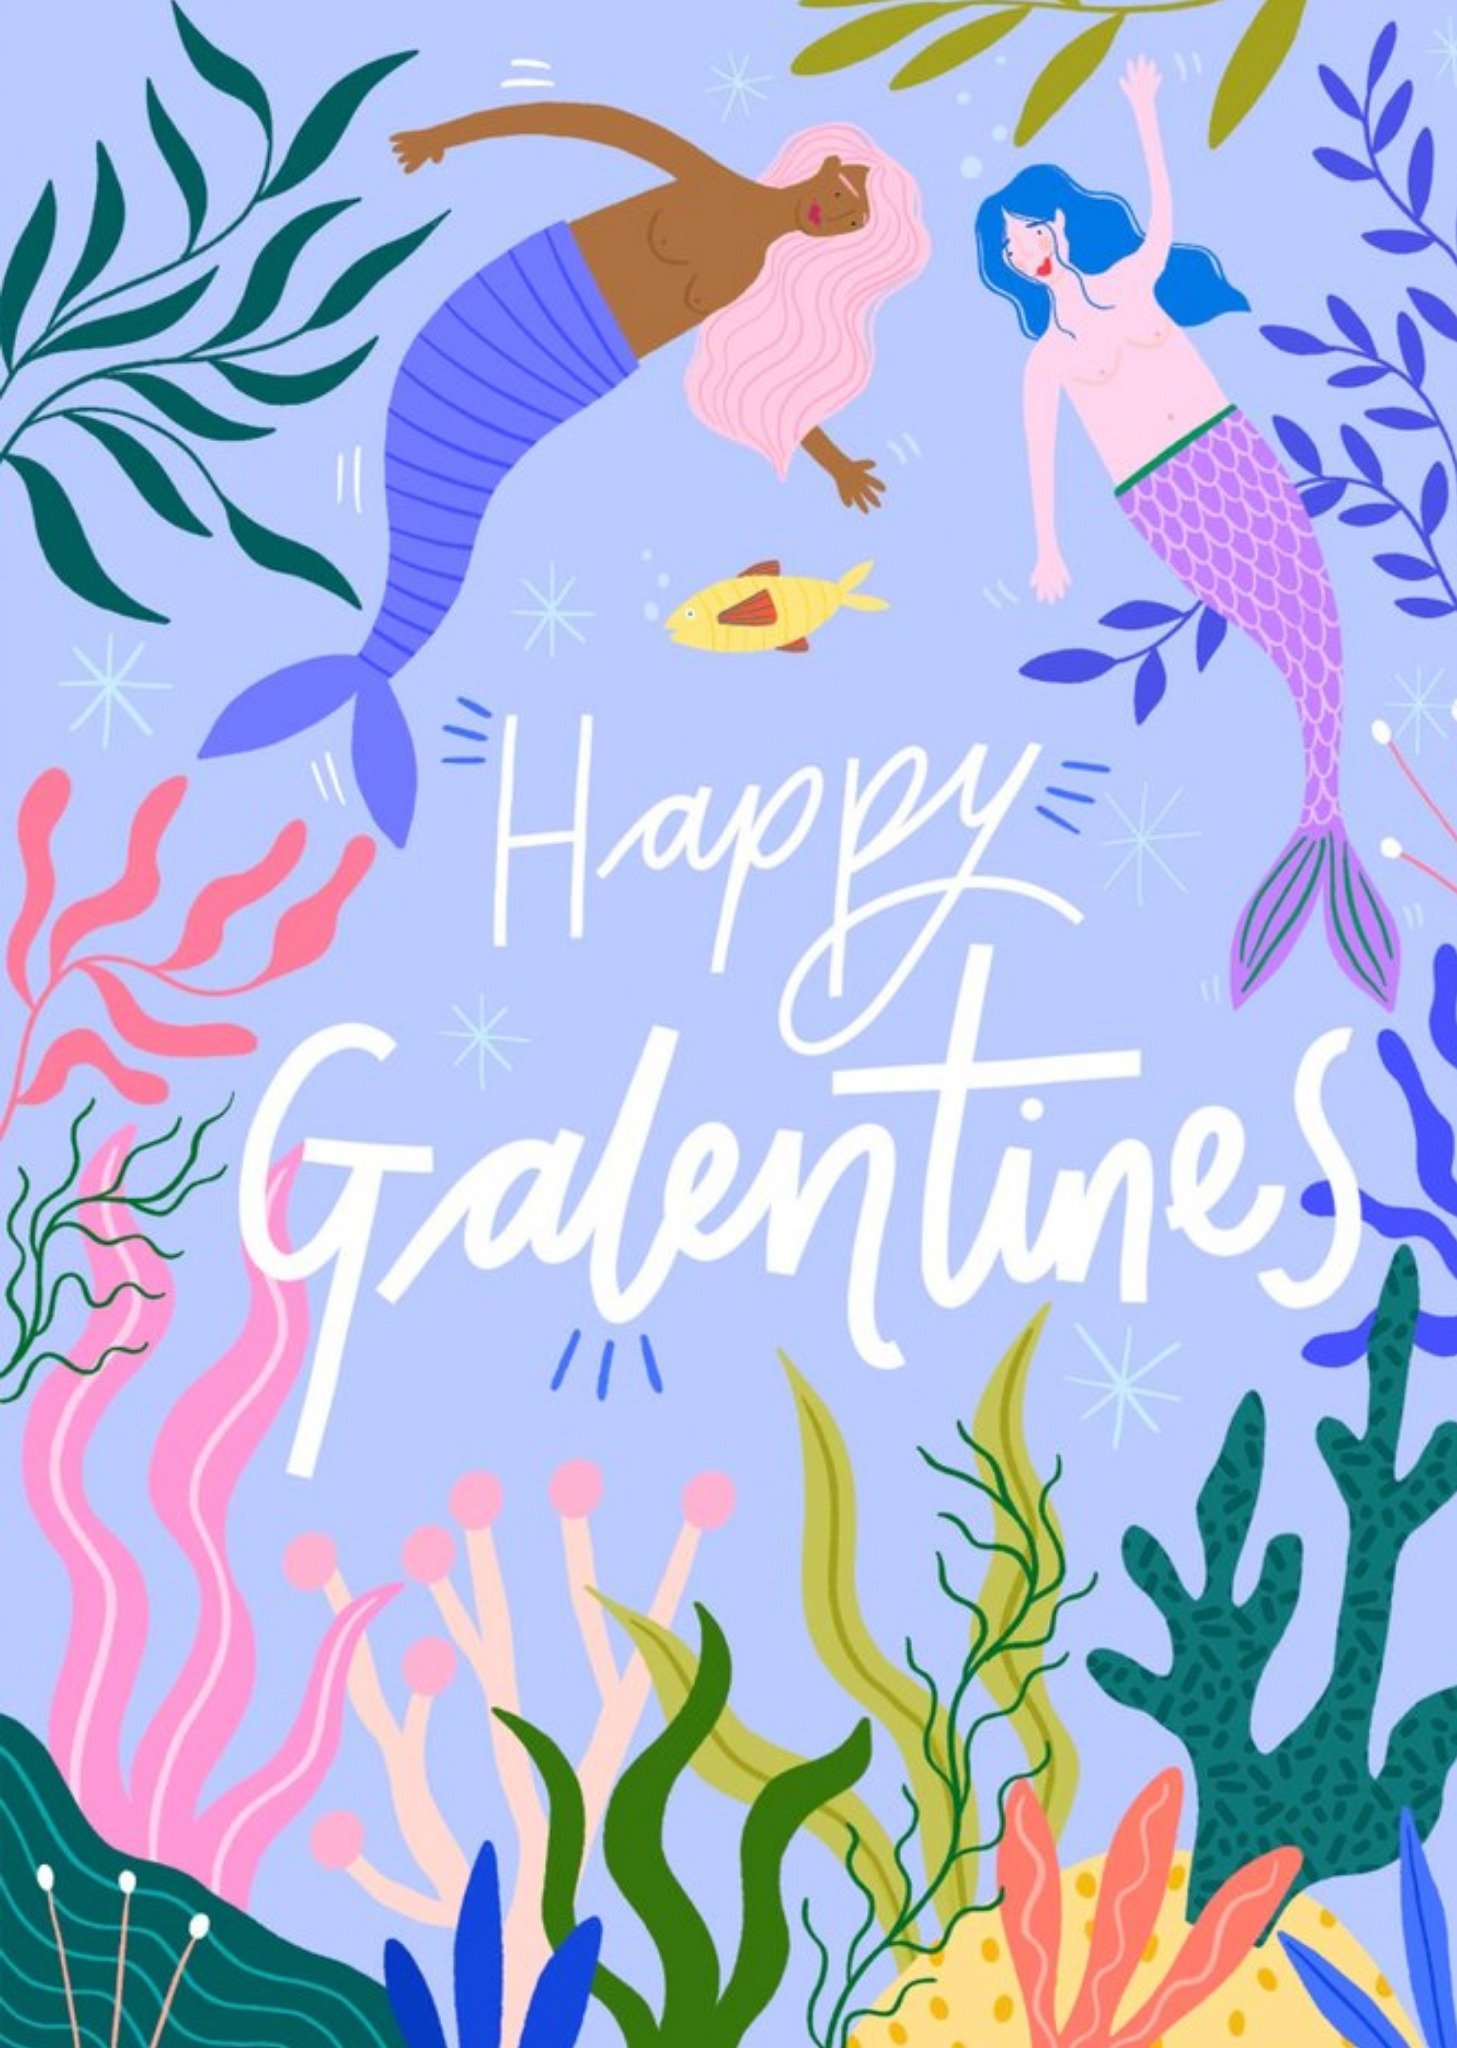 Rumble Cards Happy Galentines Mermaid Illustration Card, Large